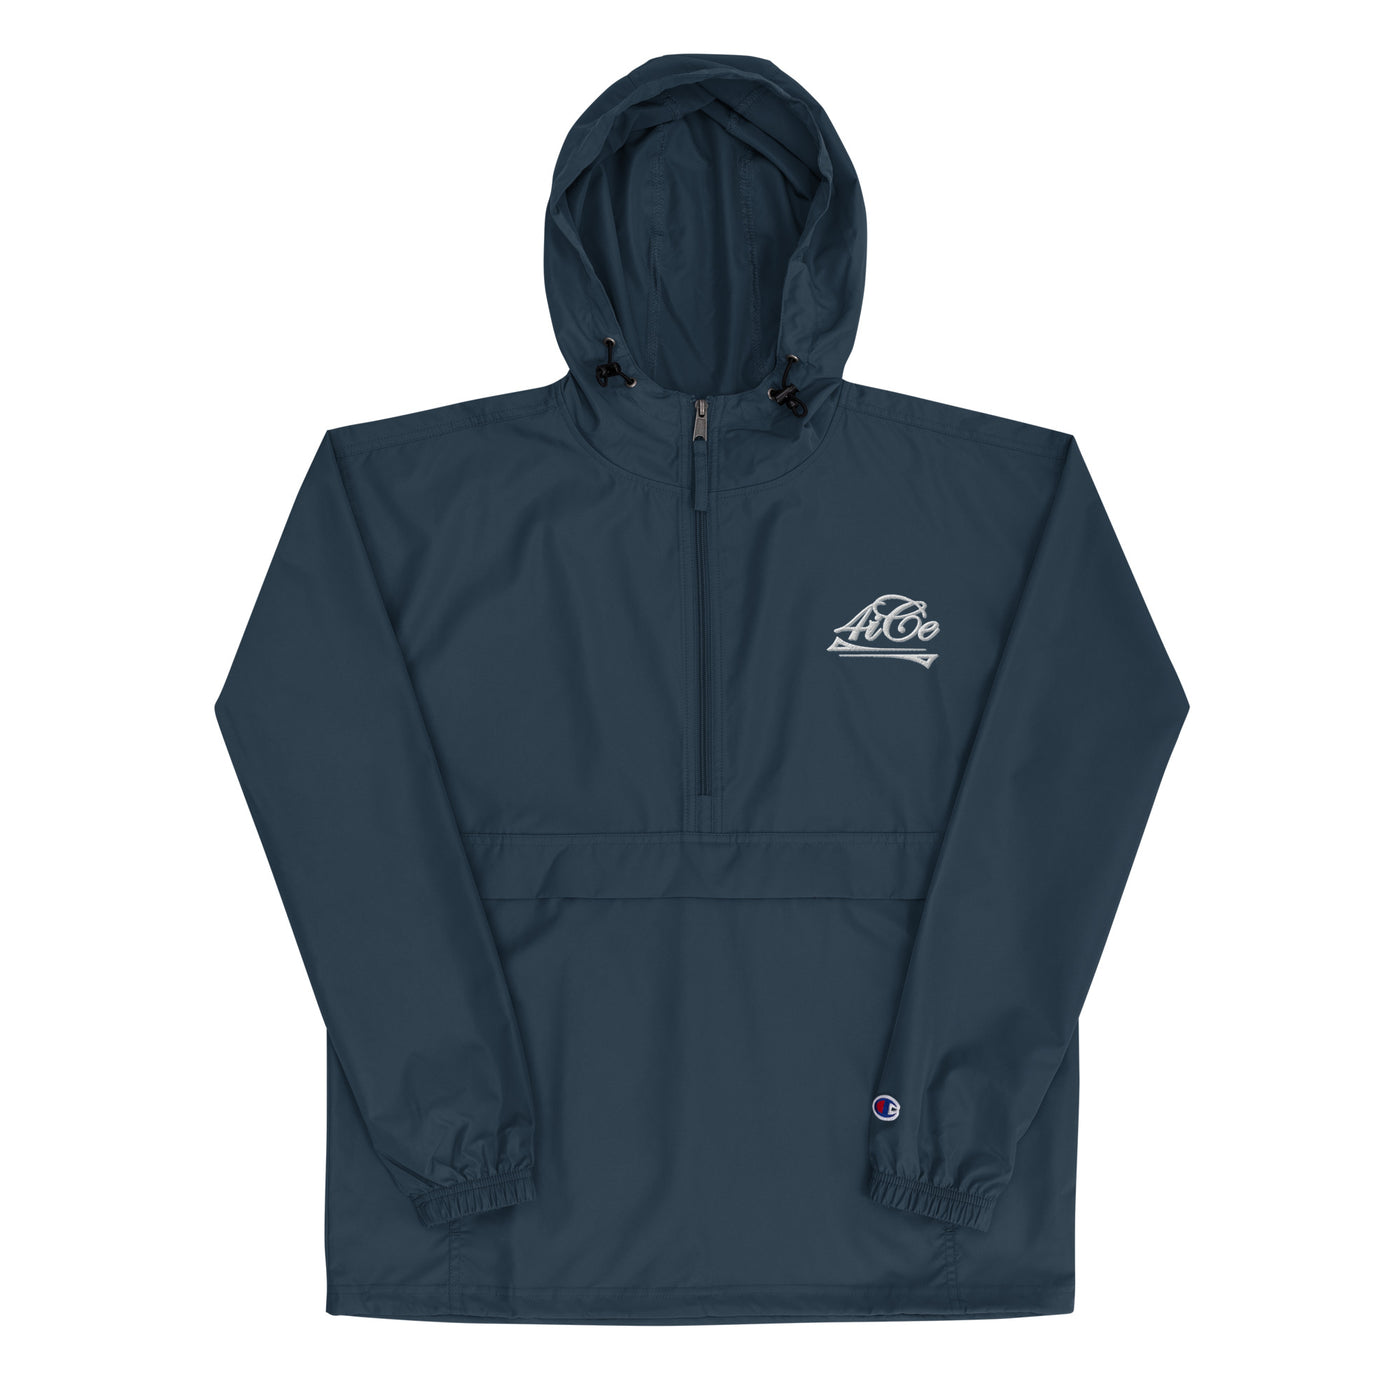 4iCe Champion Embroidered Packable Jacket